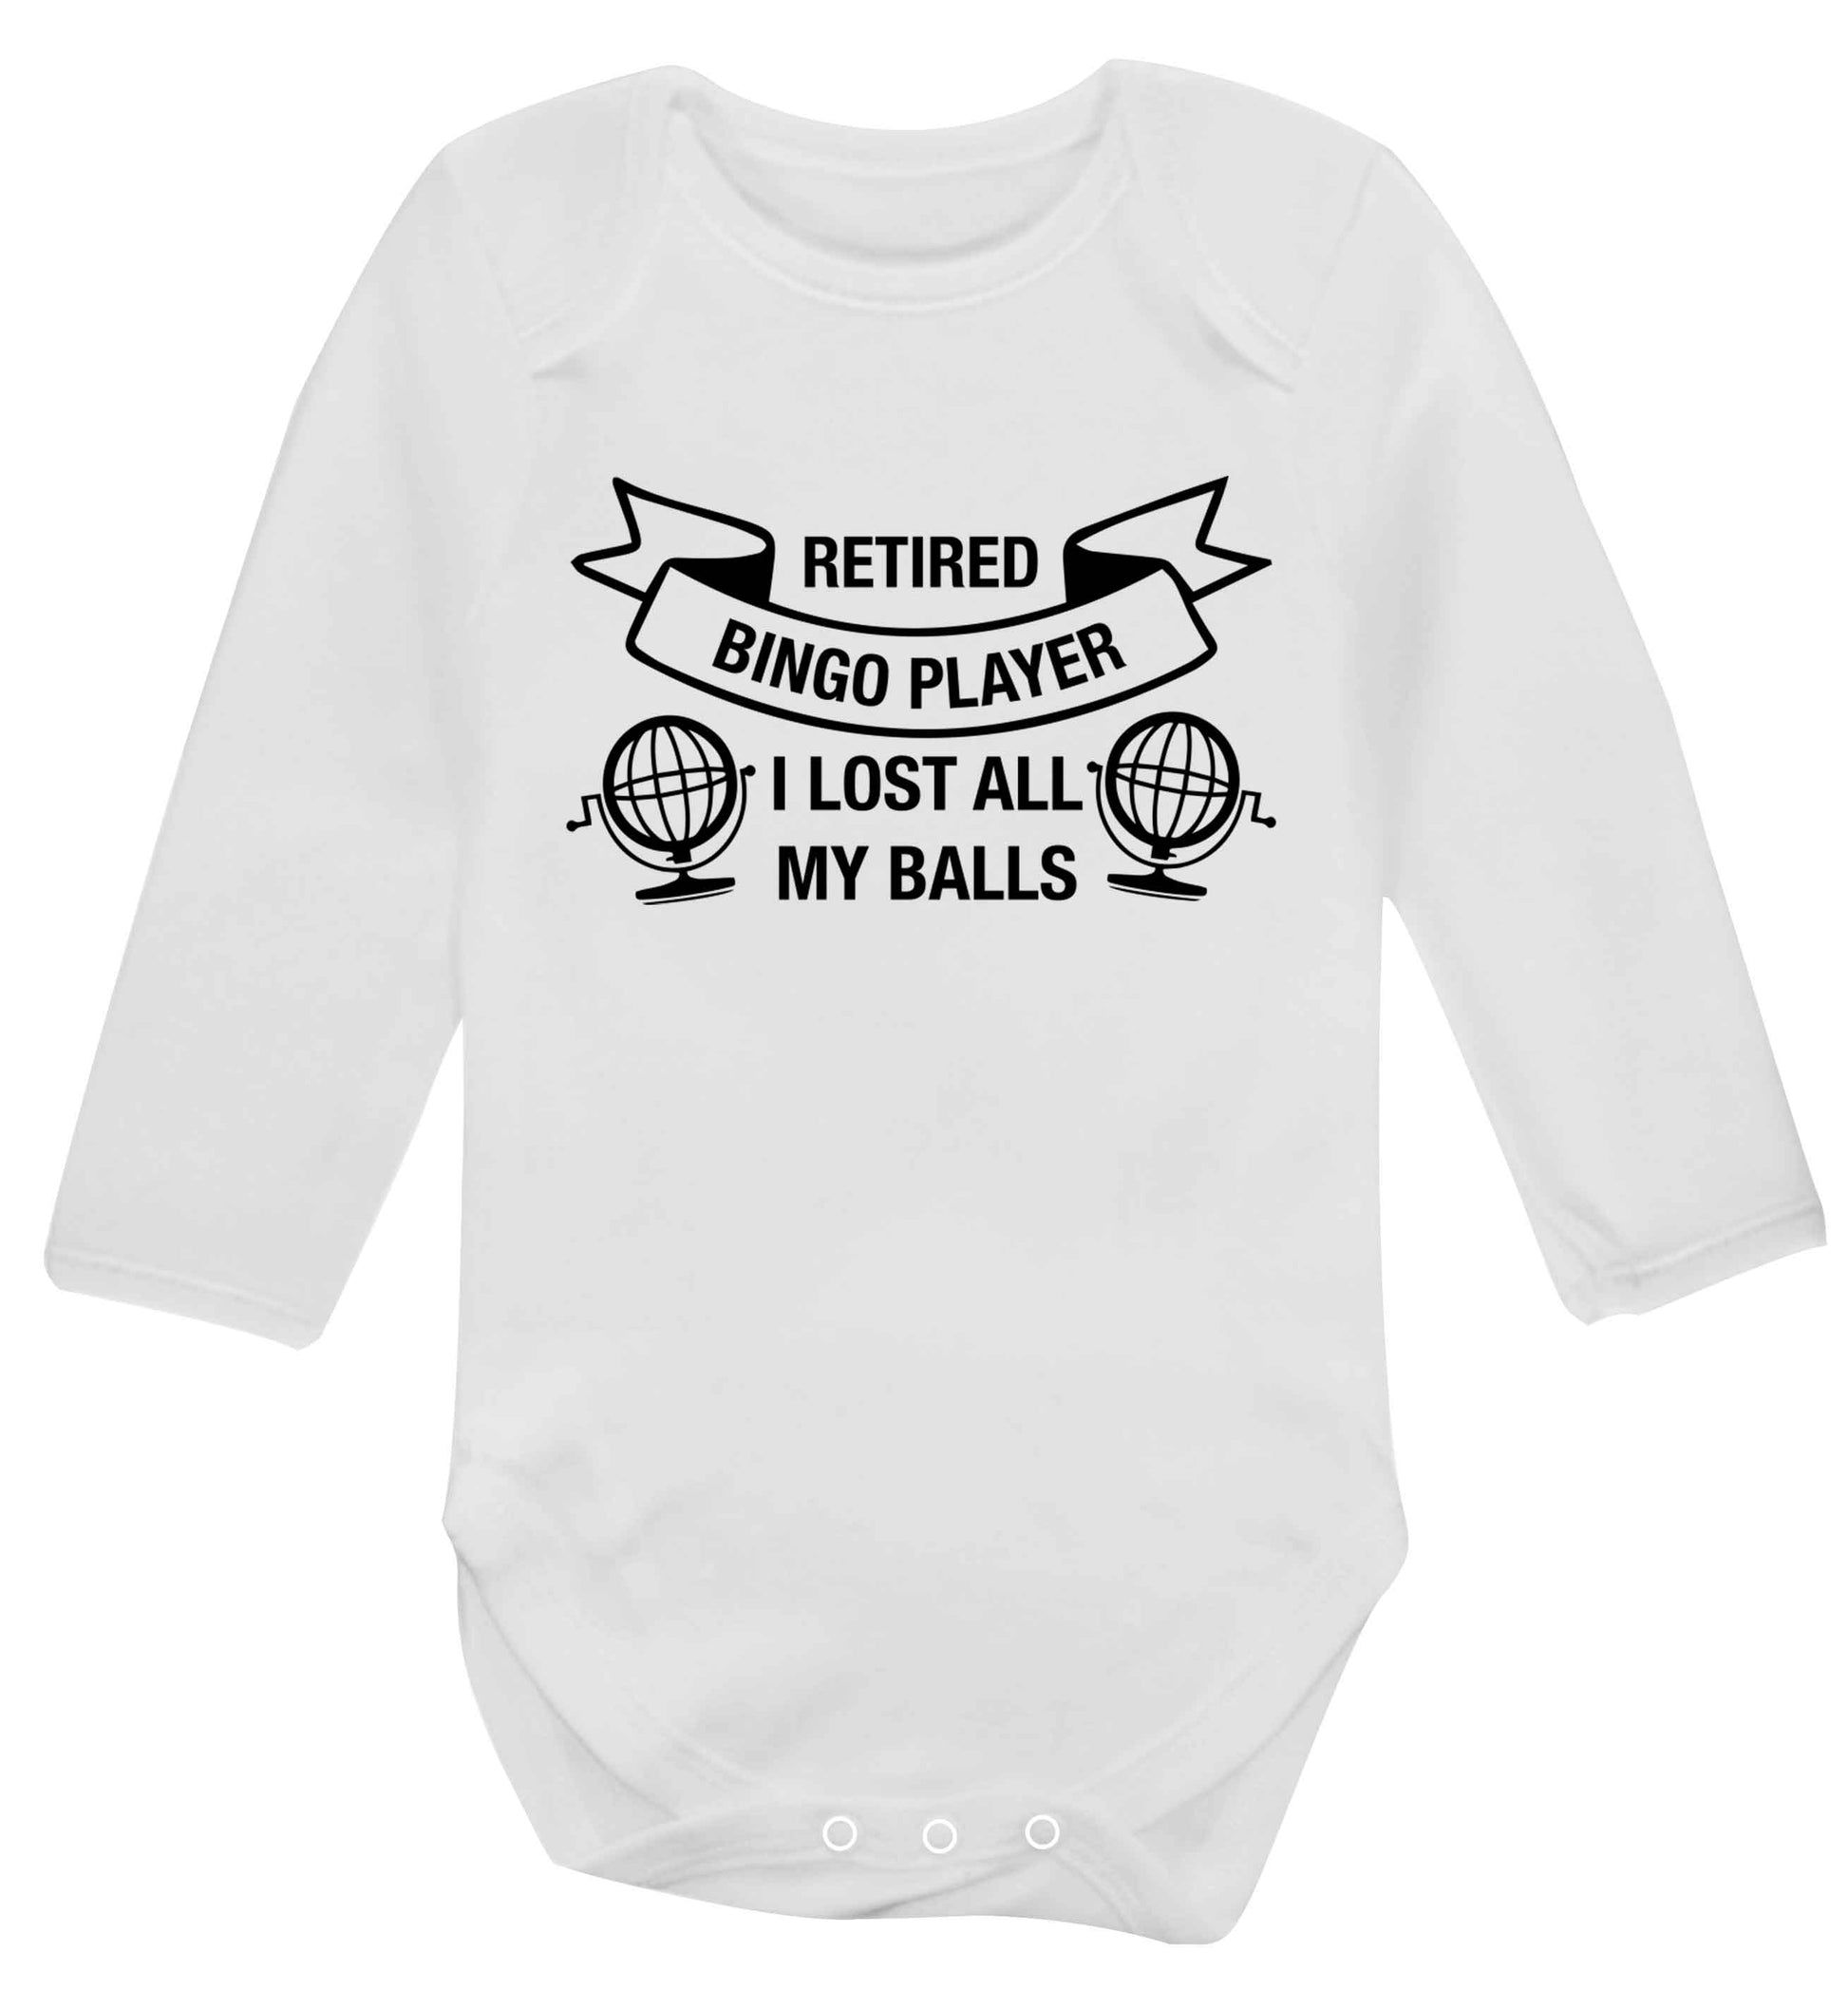 Retired bingo player I lost all my balls Baby Vest long sleeved white 6-12 months